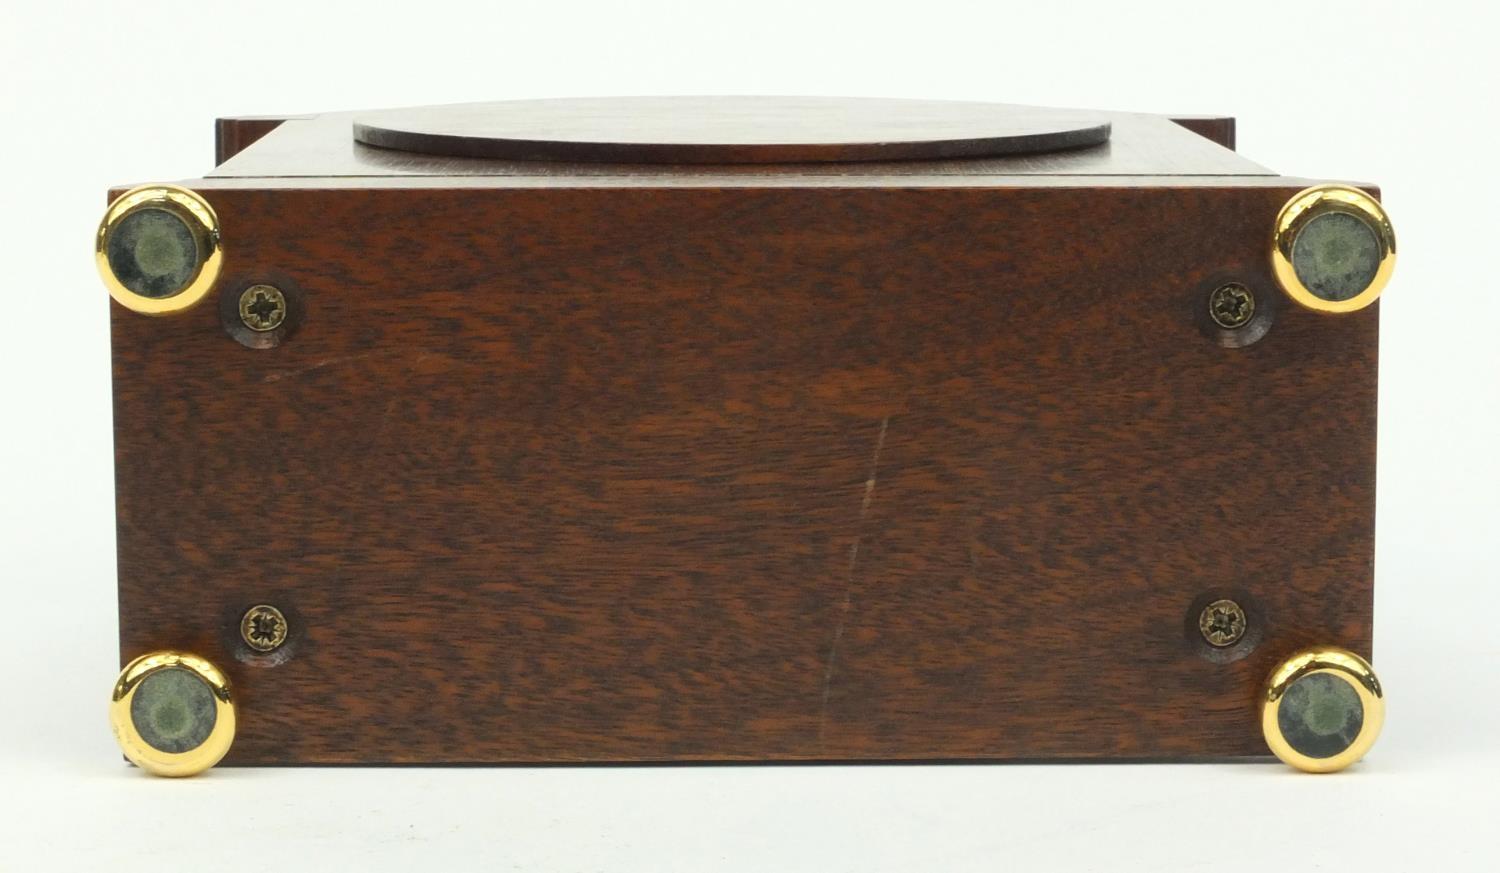 Inlaid mahogany Comitti of London mantel clock, with brass handle, 25cm high including the handle - Image 7 of 7